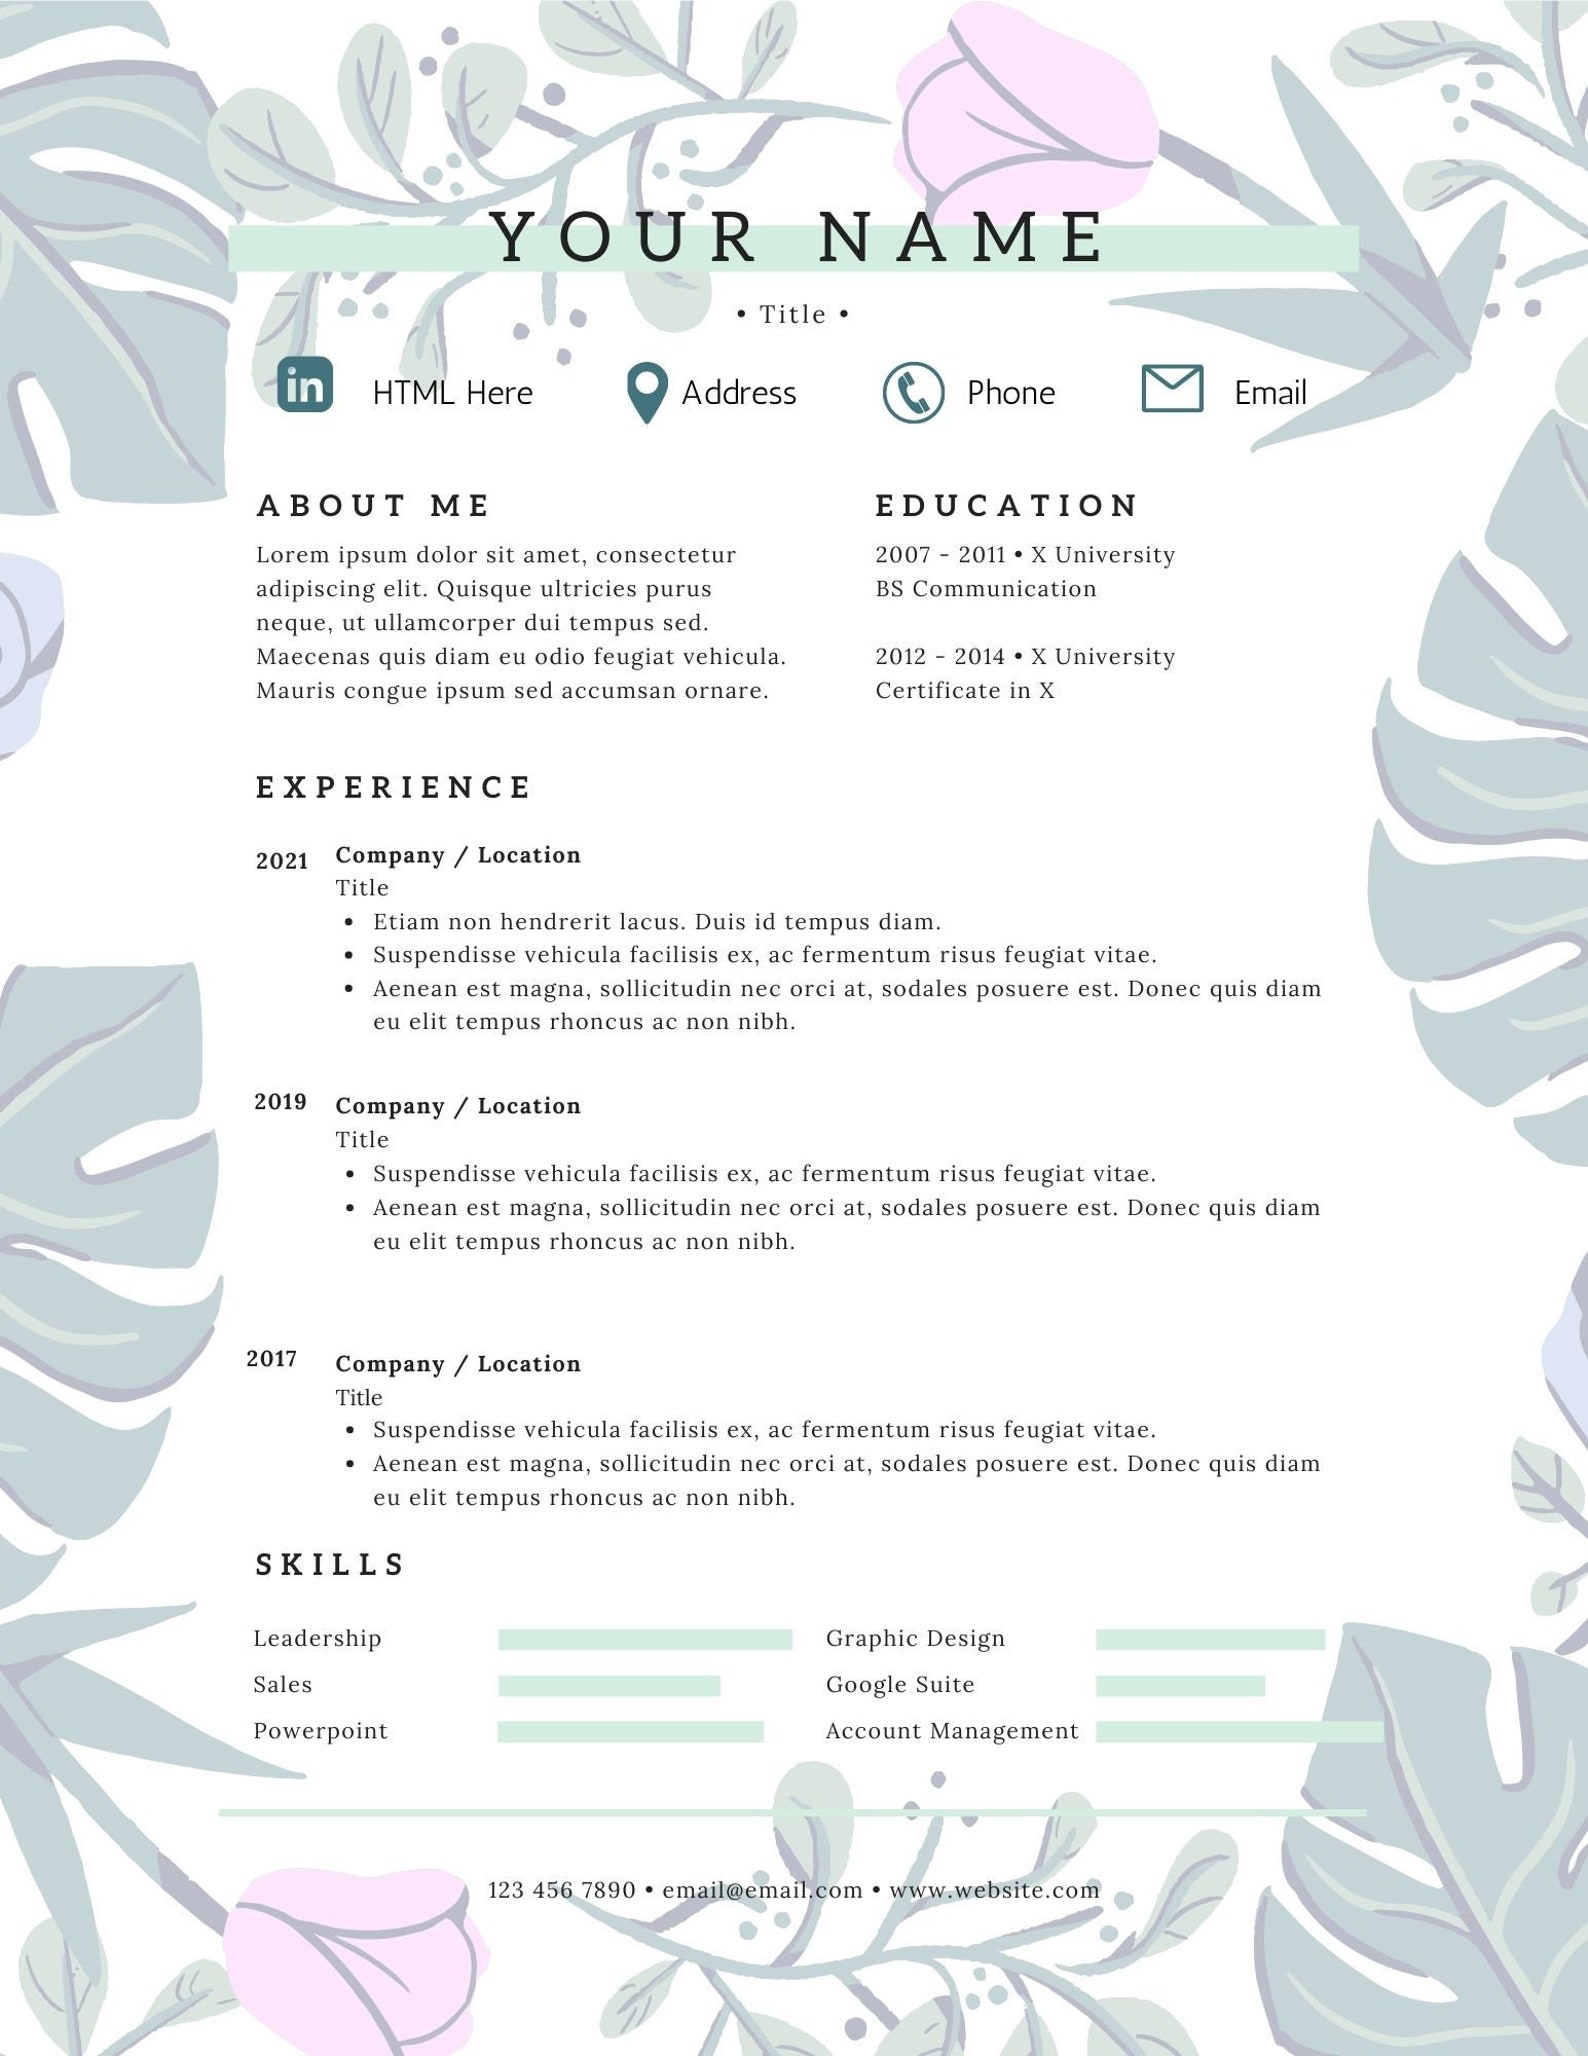 how to build a resume in canva